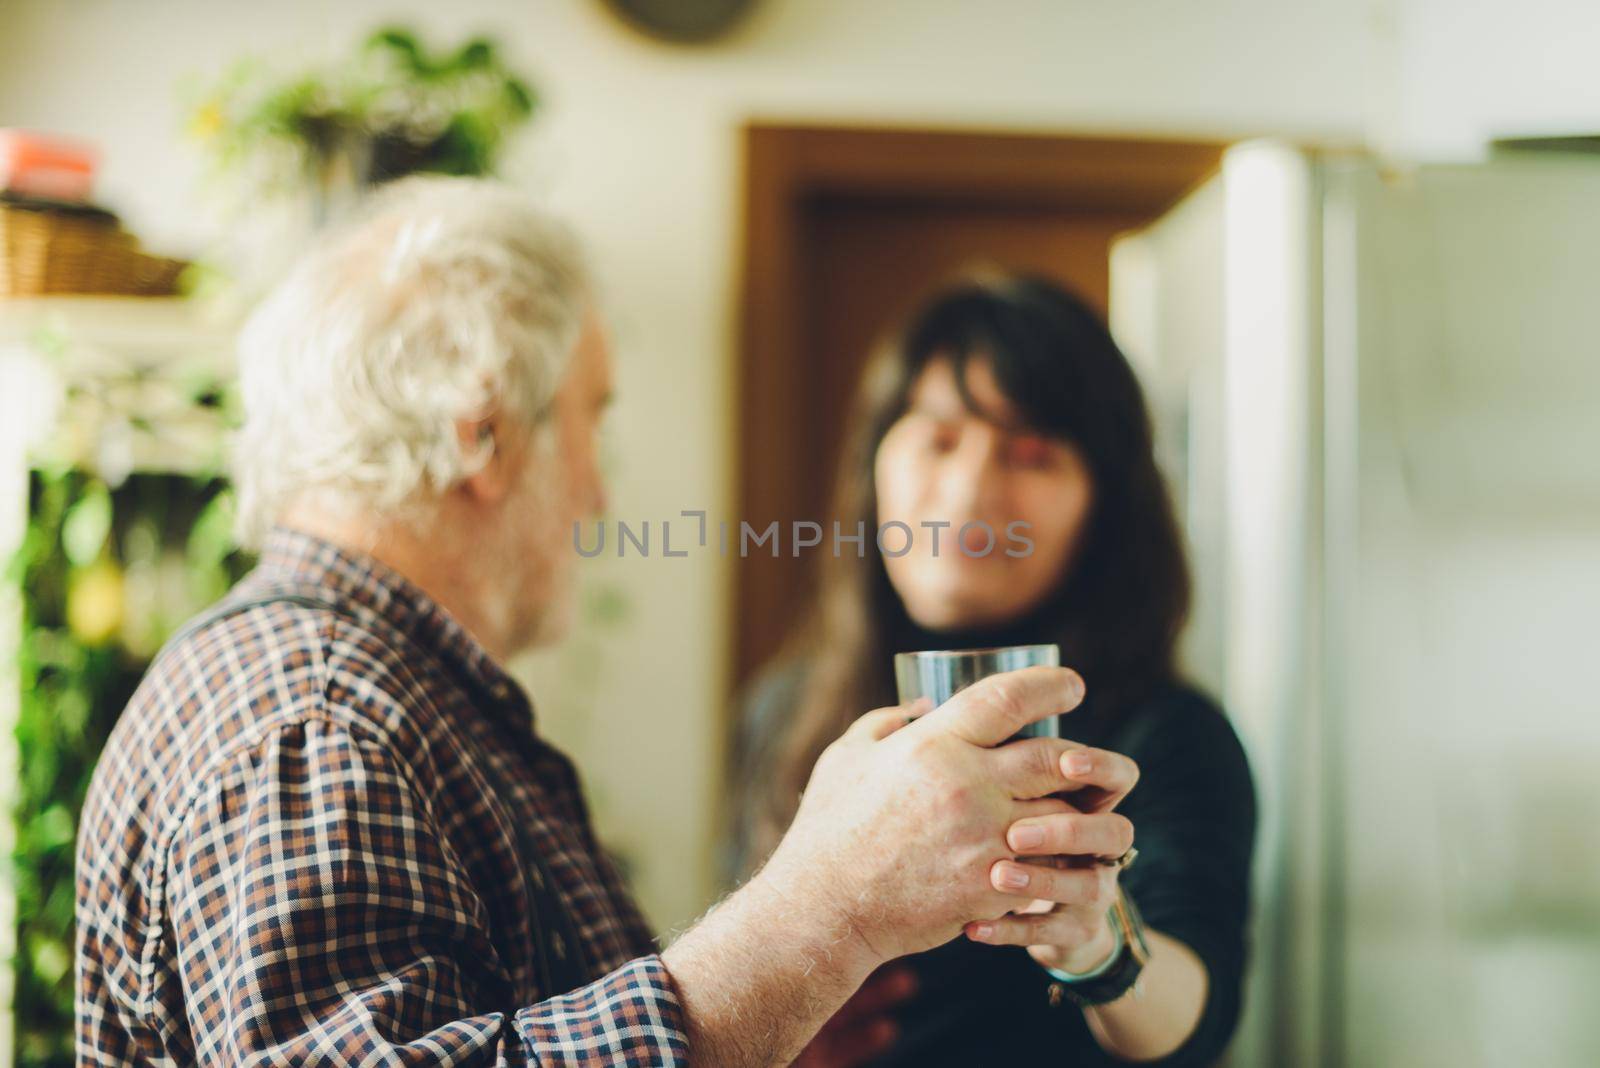 caucasian man drinking wine and getting drunk harassing young hispanic woman wife - alcoholism and domestic violence concept. High quality photocaucasian man drinking wine and getting drunk harassing young hispanic woman wife - alcoholism and domestic violence concept